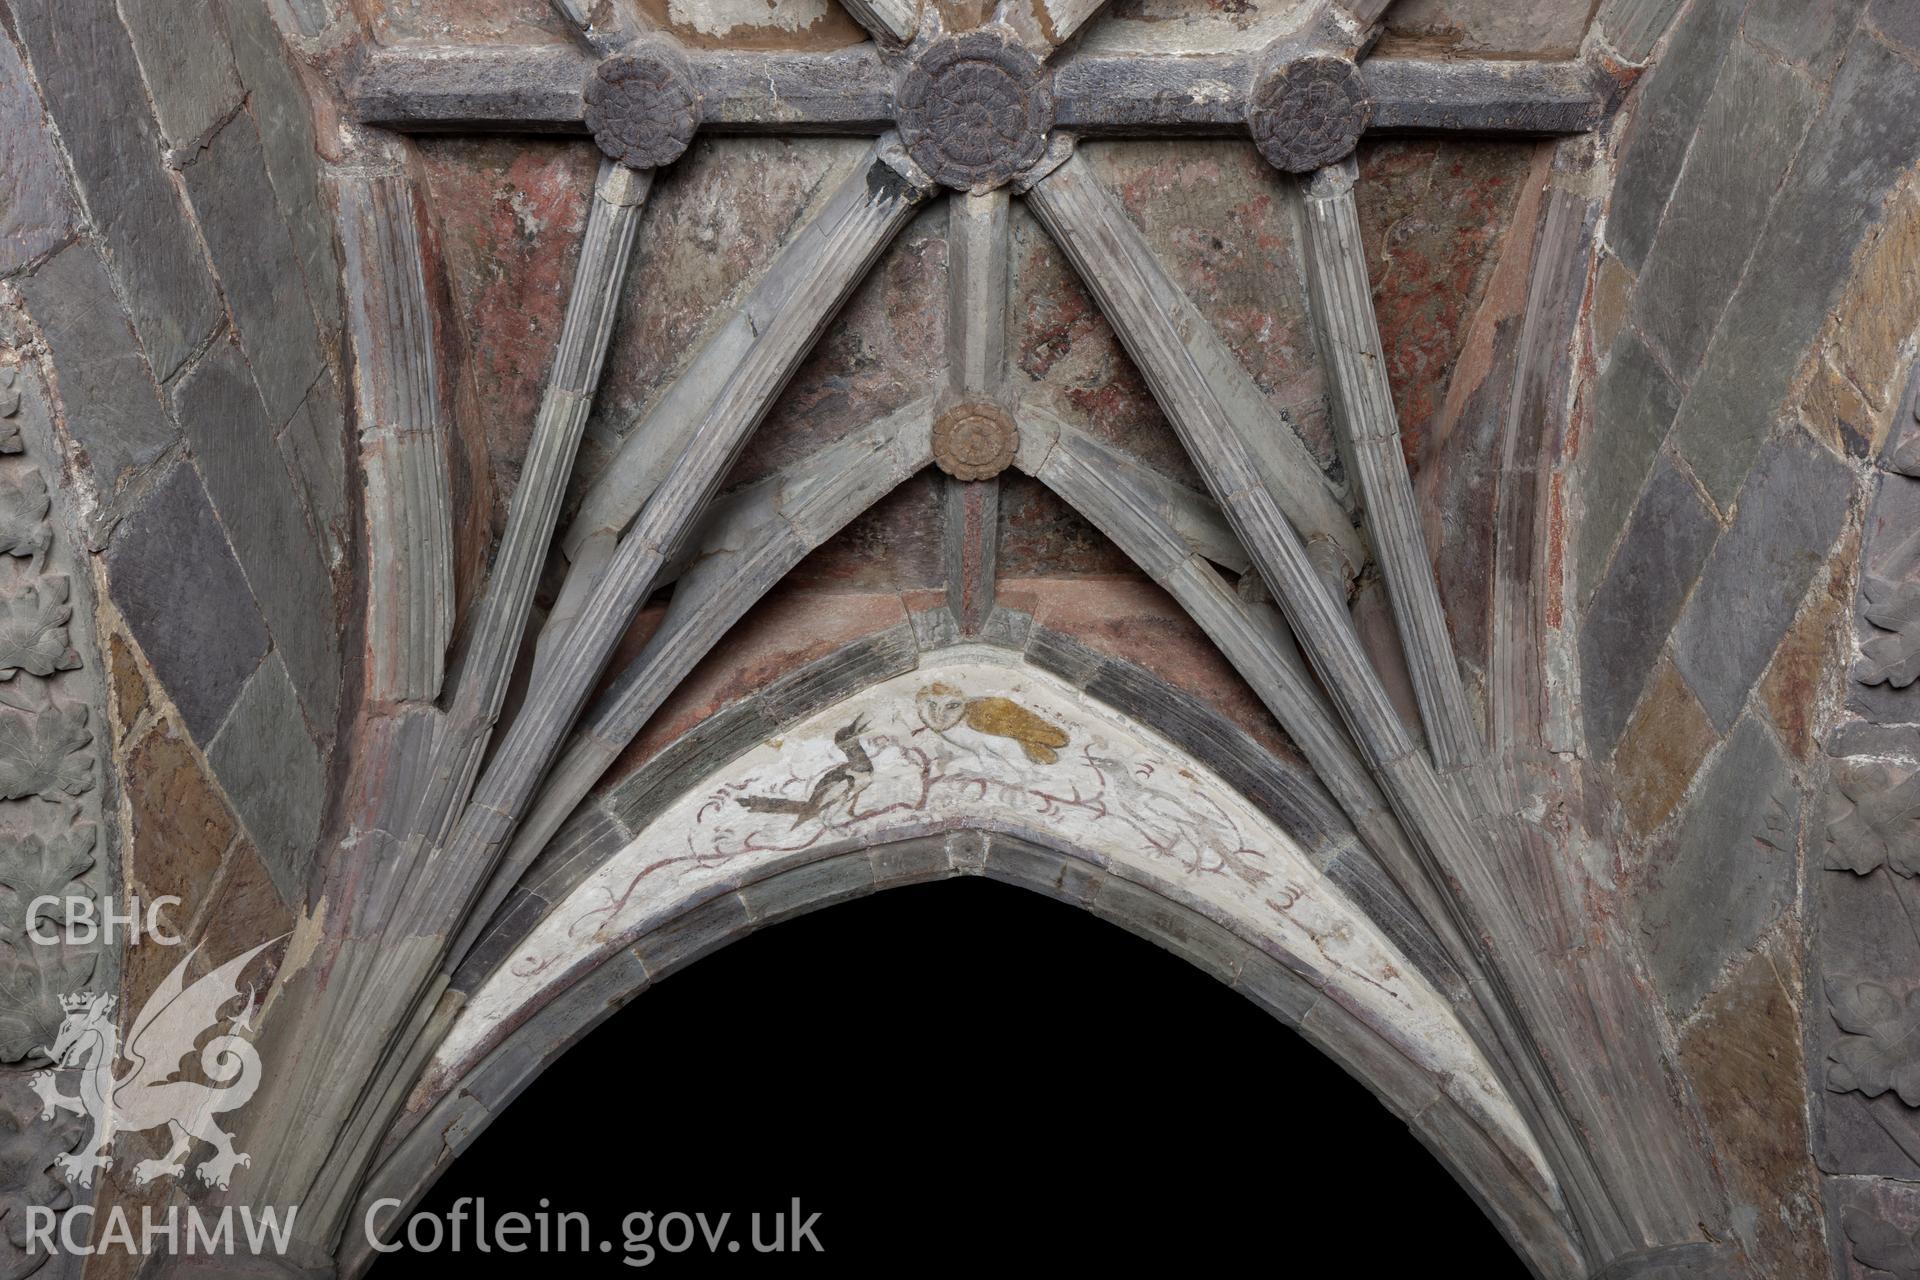 Owl  with decorated vaulting